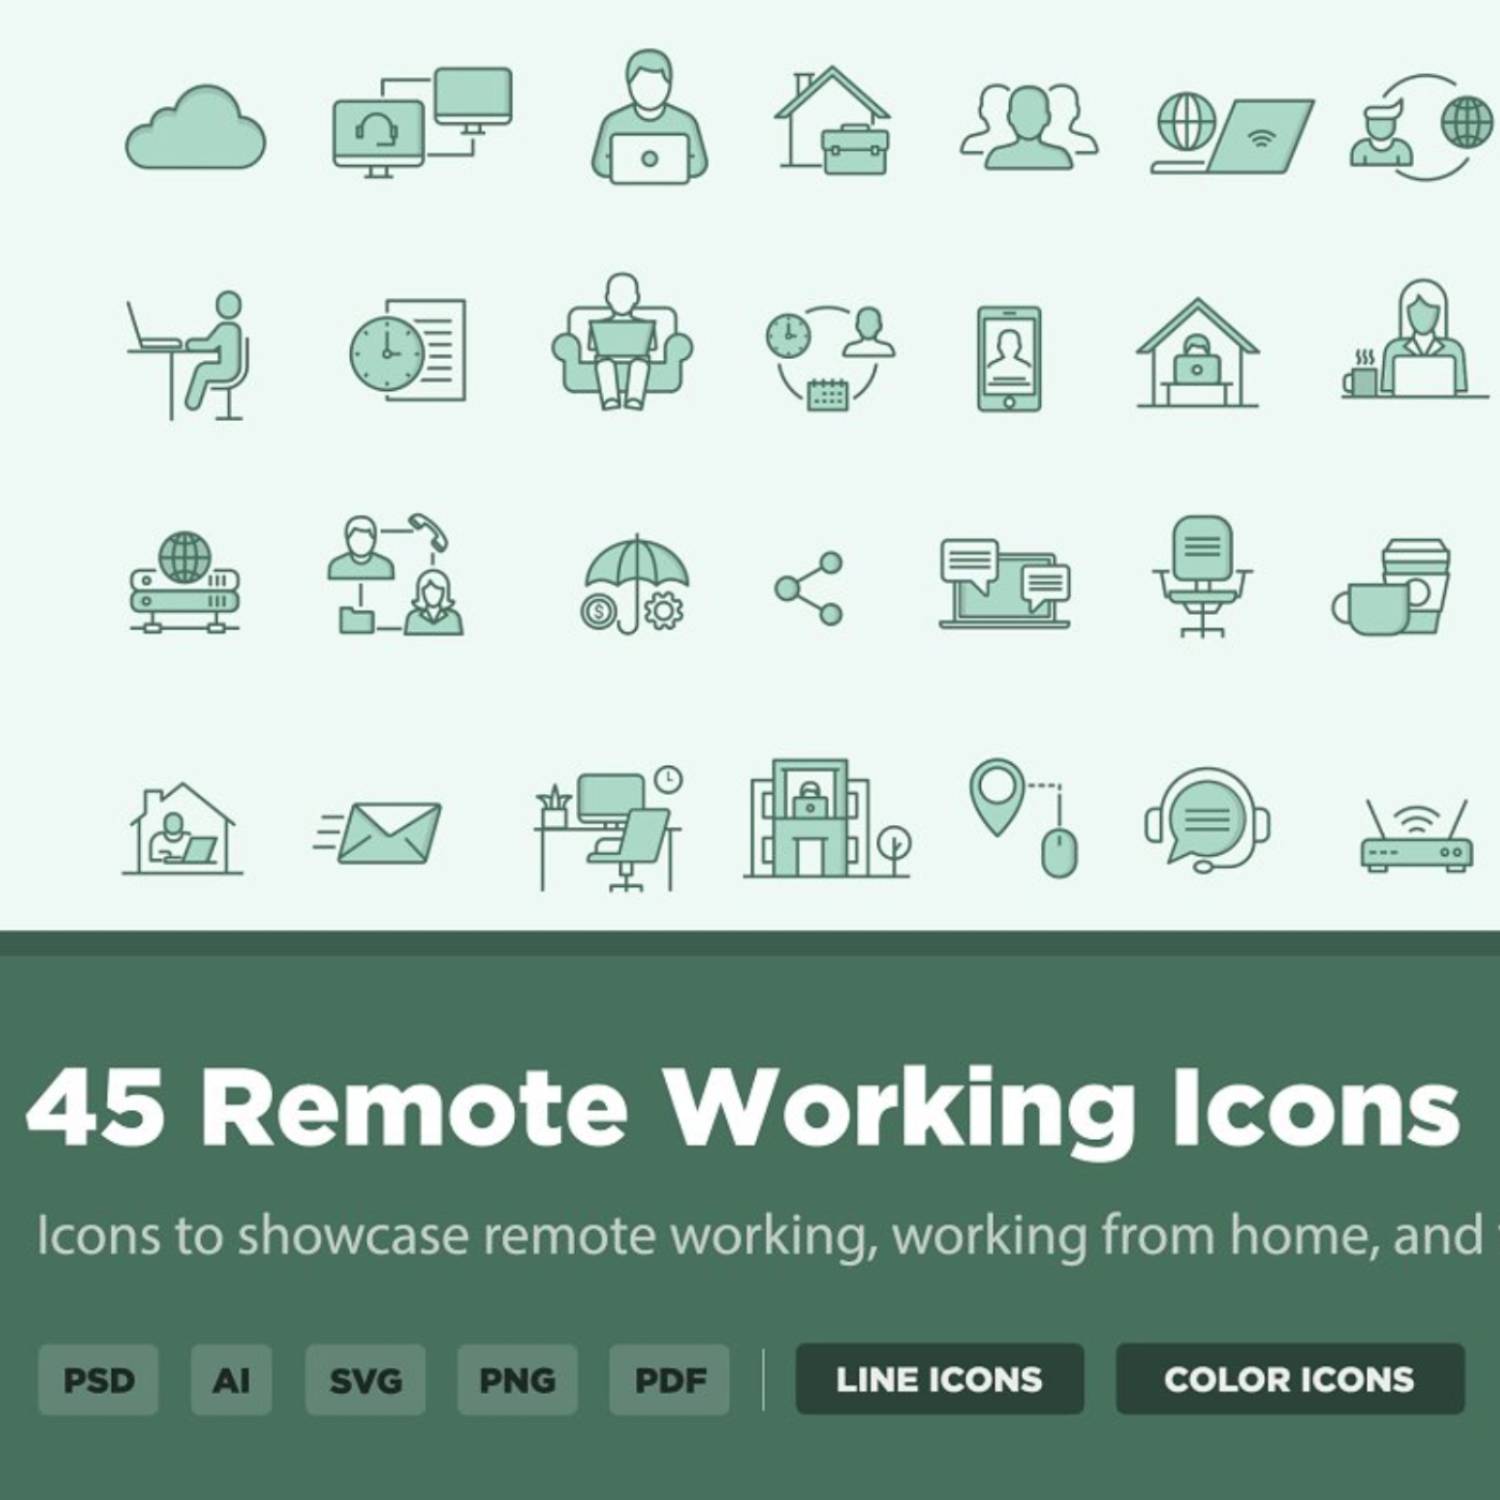 45 Remote Working Icons Main Cover.